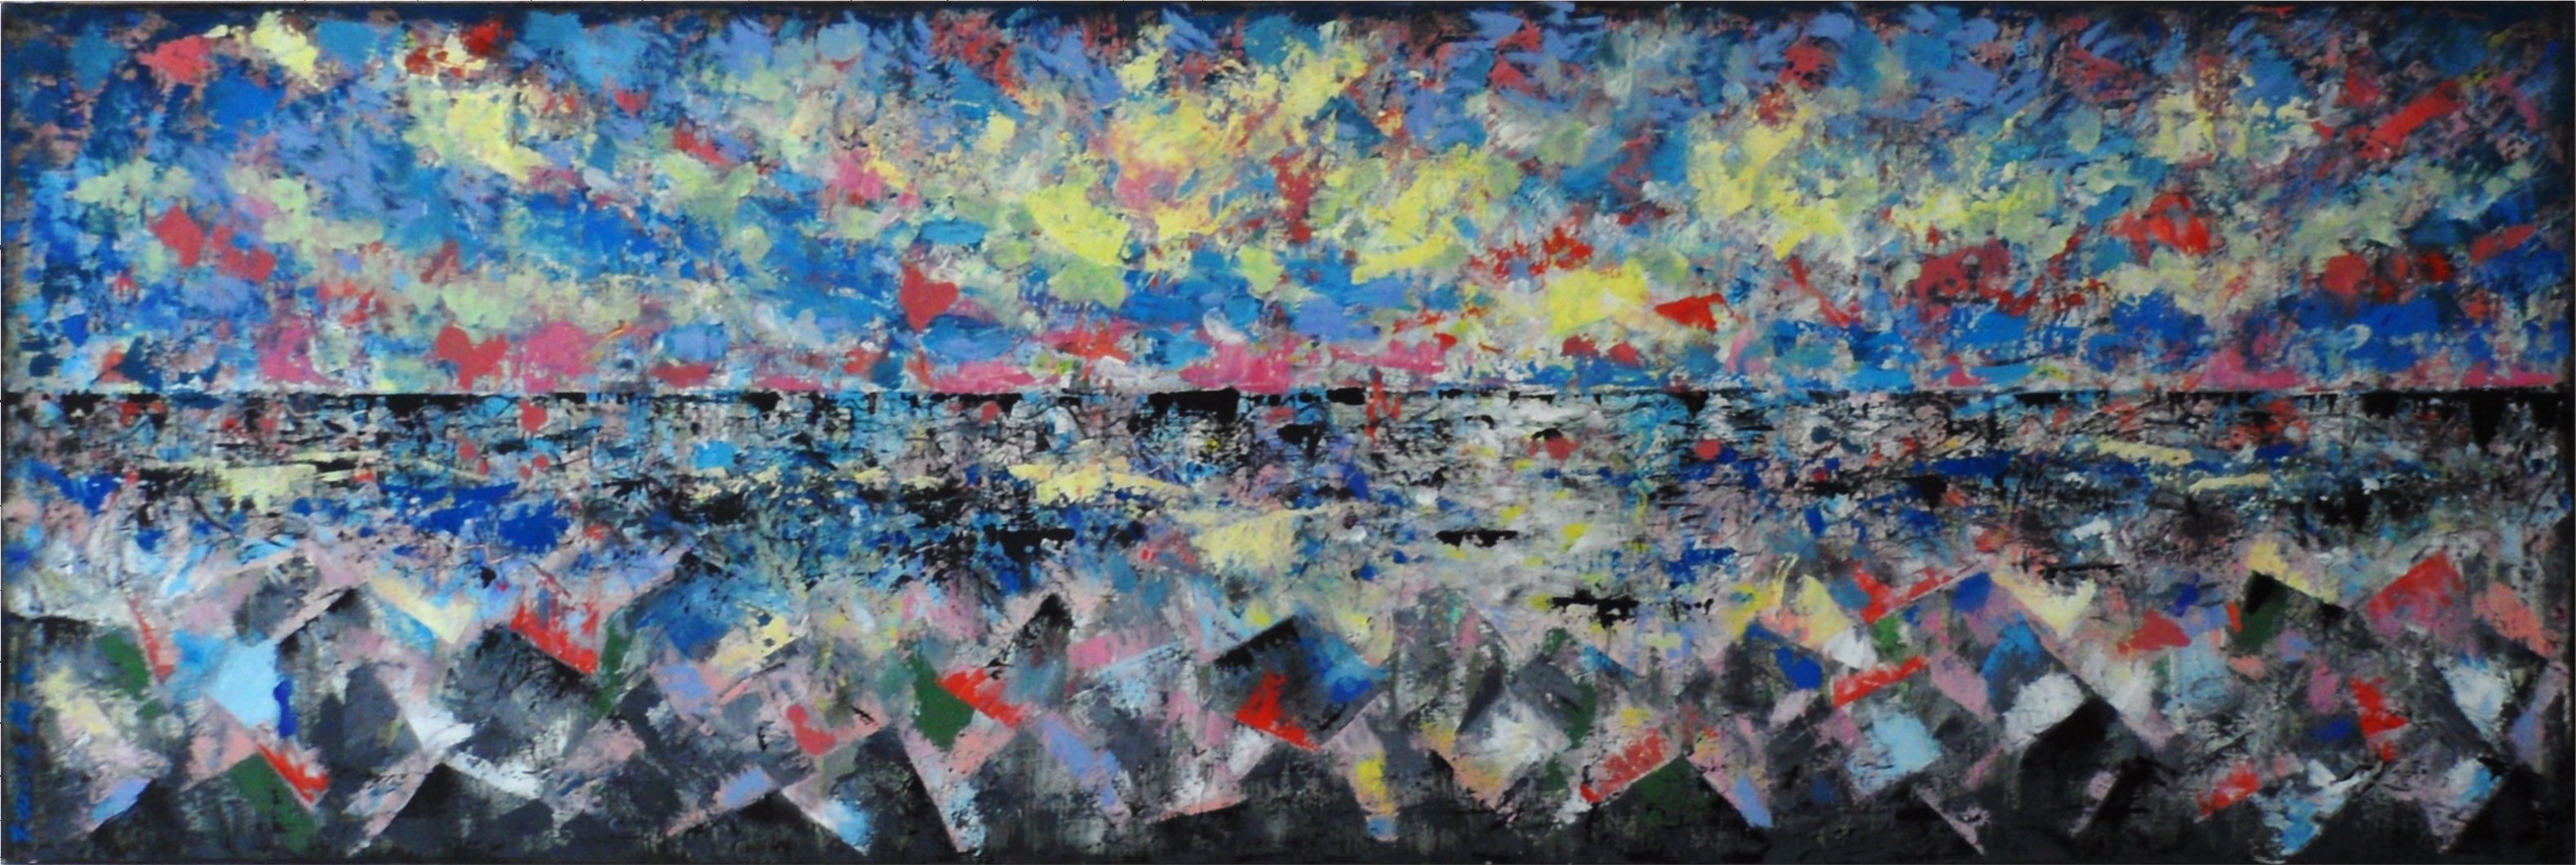 Zaure Kadyke; Defense Of The Mediterranean, 2018, Original Painting Oil, 120 x 40 cm. Artwork description: 241 pink sea sky blue sunset water breakwater yellow clouds blak horizon oceanframed extra charge.used standard ready primed organic cotton stretched on a frame.you can pay by Paypal...